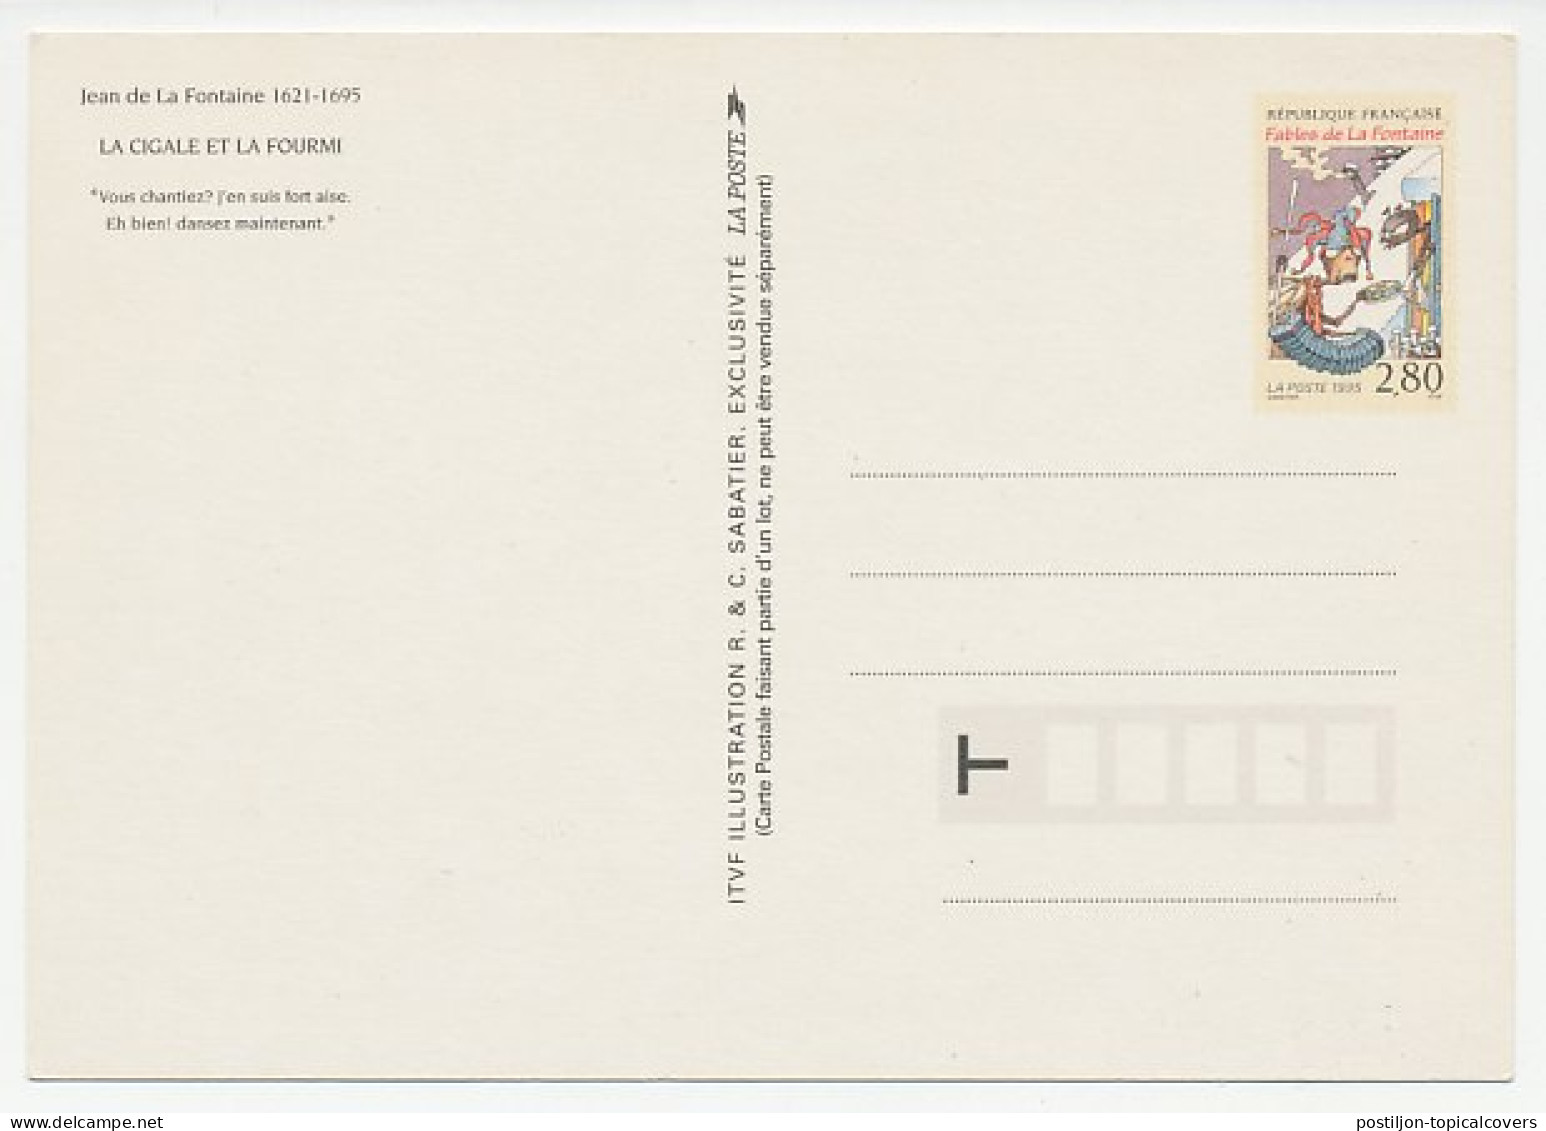 Postal Stationery France 1995 Jean De La Fontaine - The Ant And The Grasshopper - Fairy Tales, Popular Stories & Legends